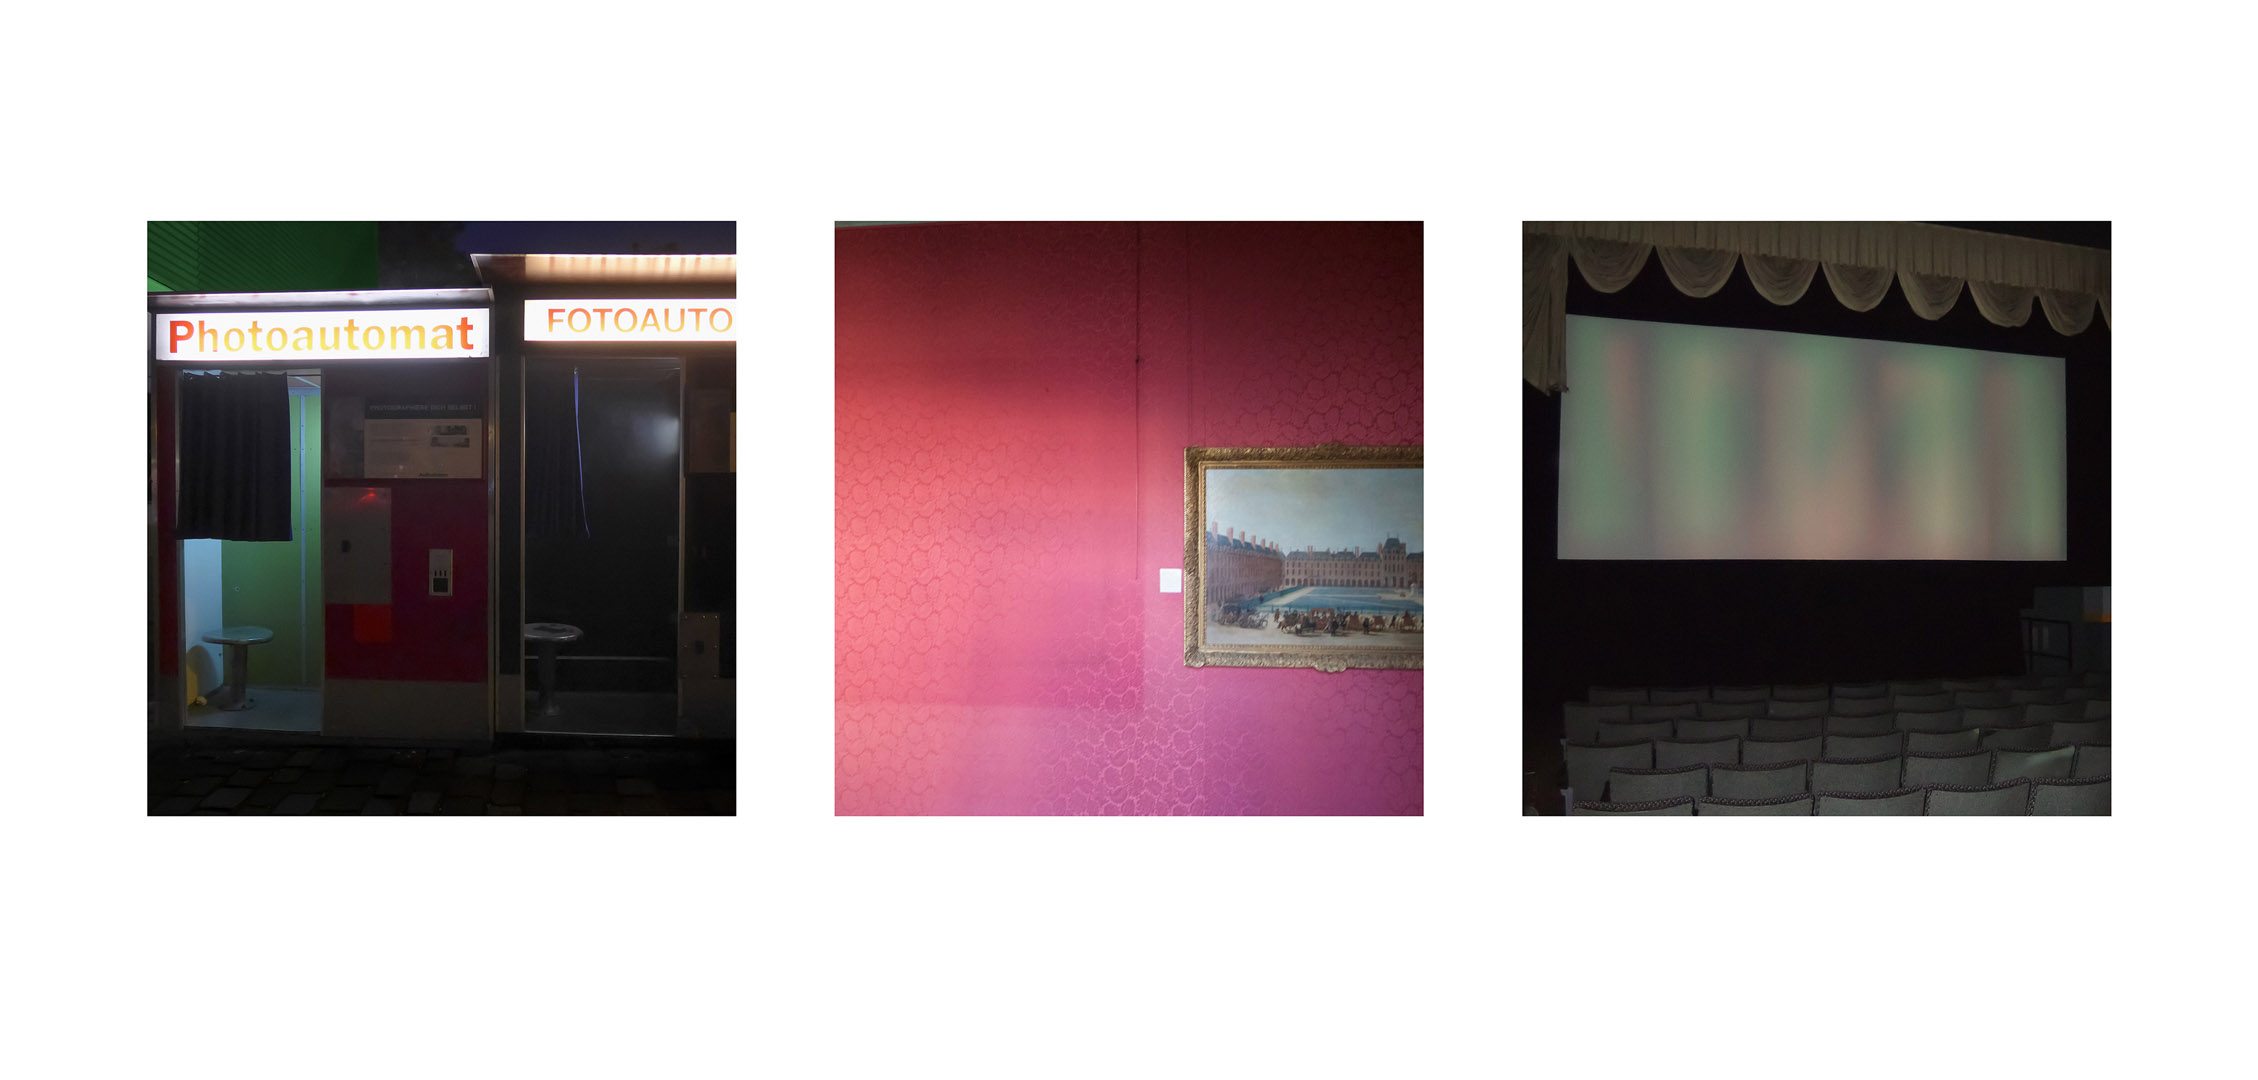 Photoautomat + Painting on Red Wall + Cinema Screen 2022